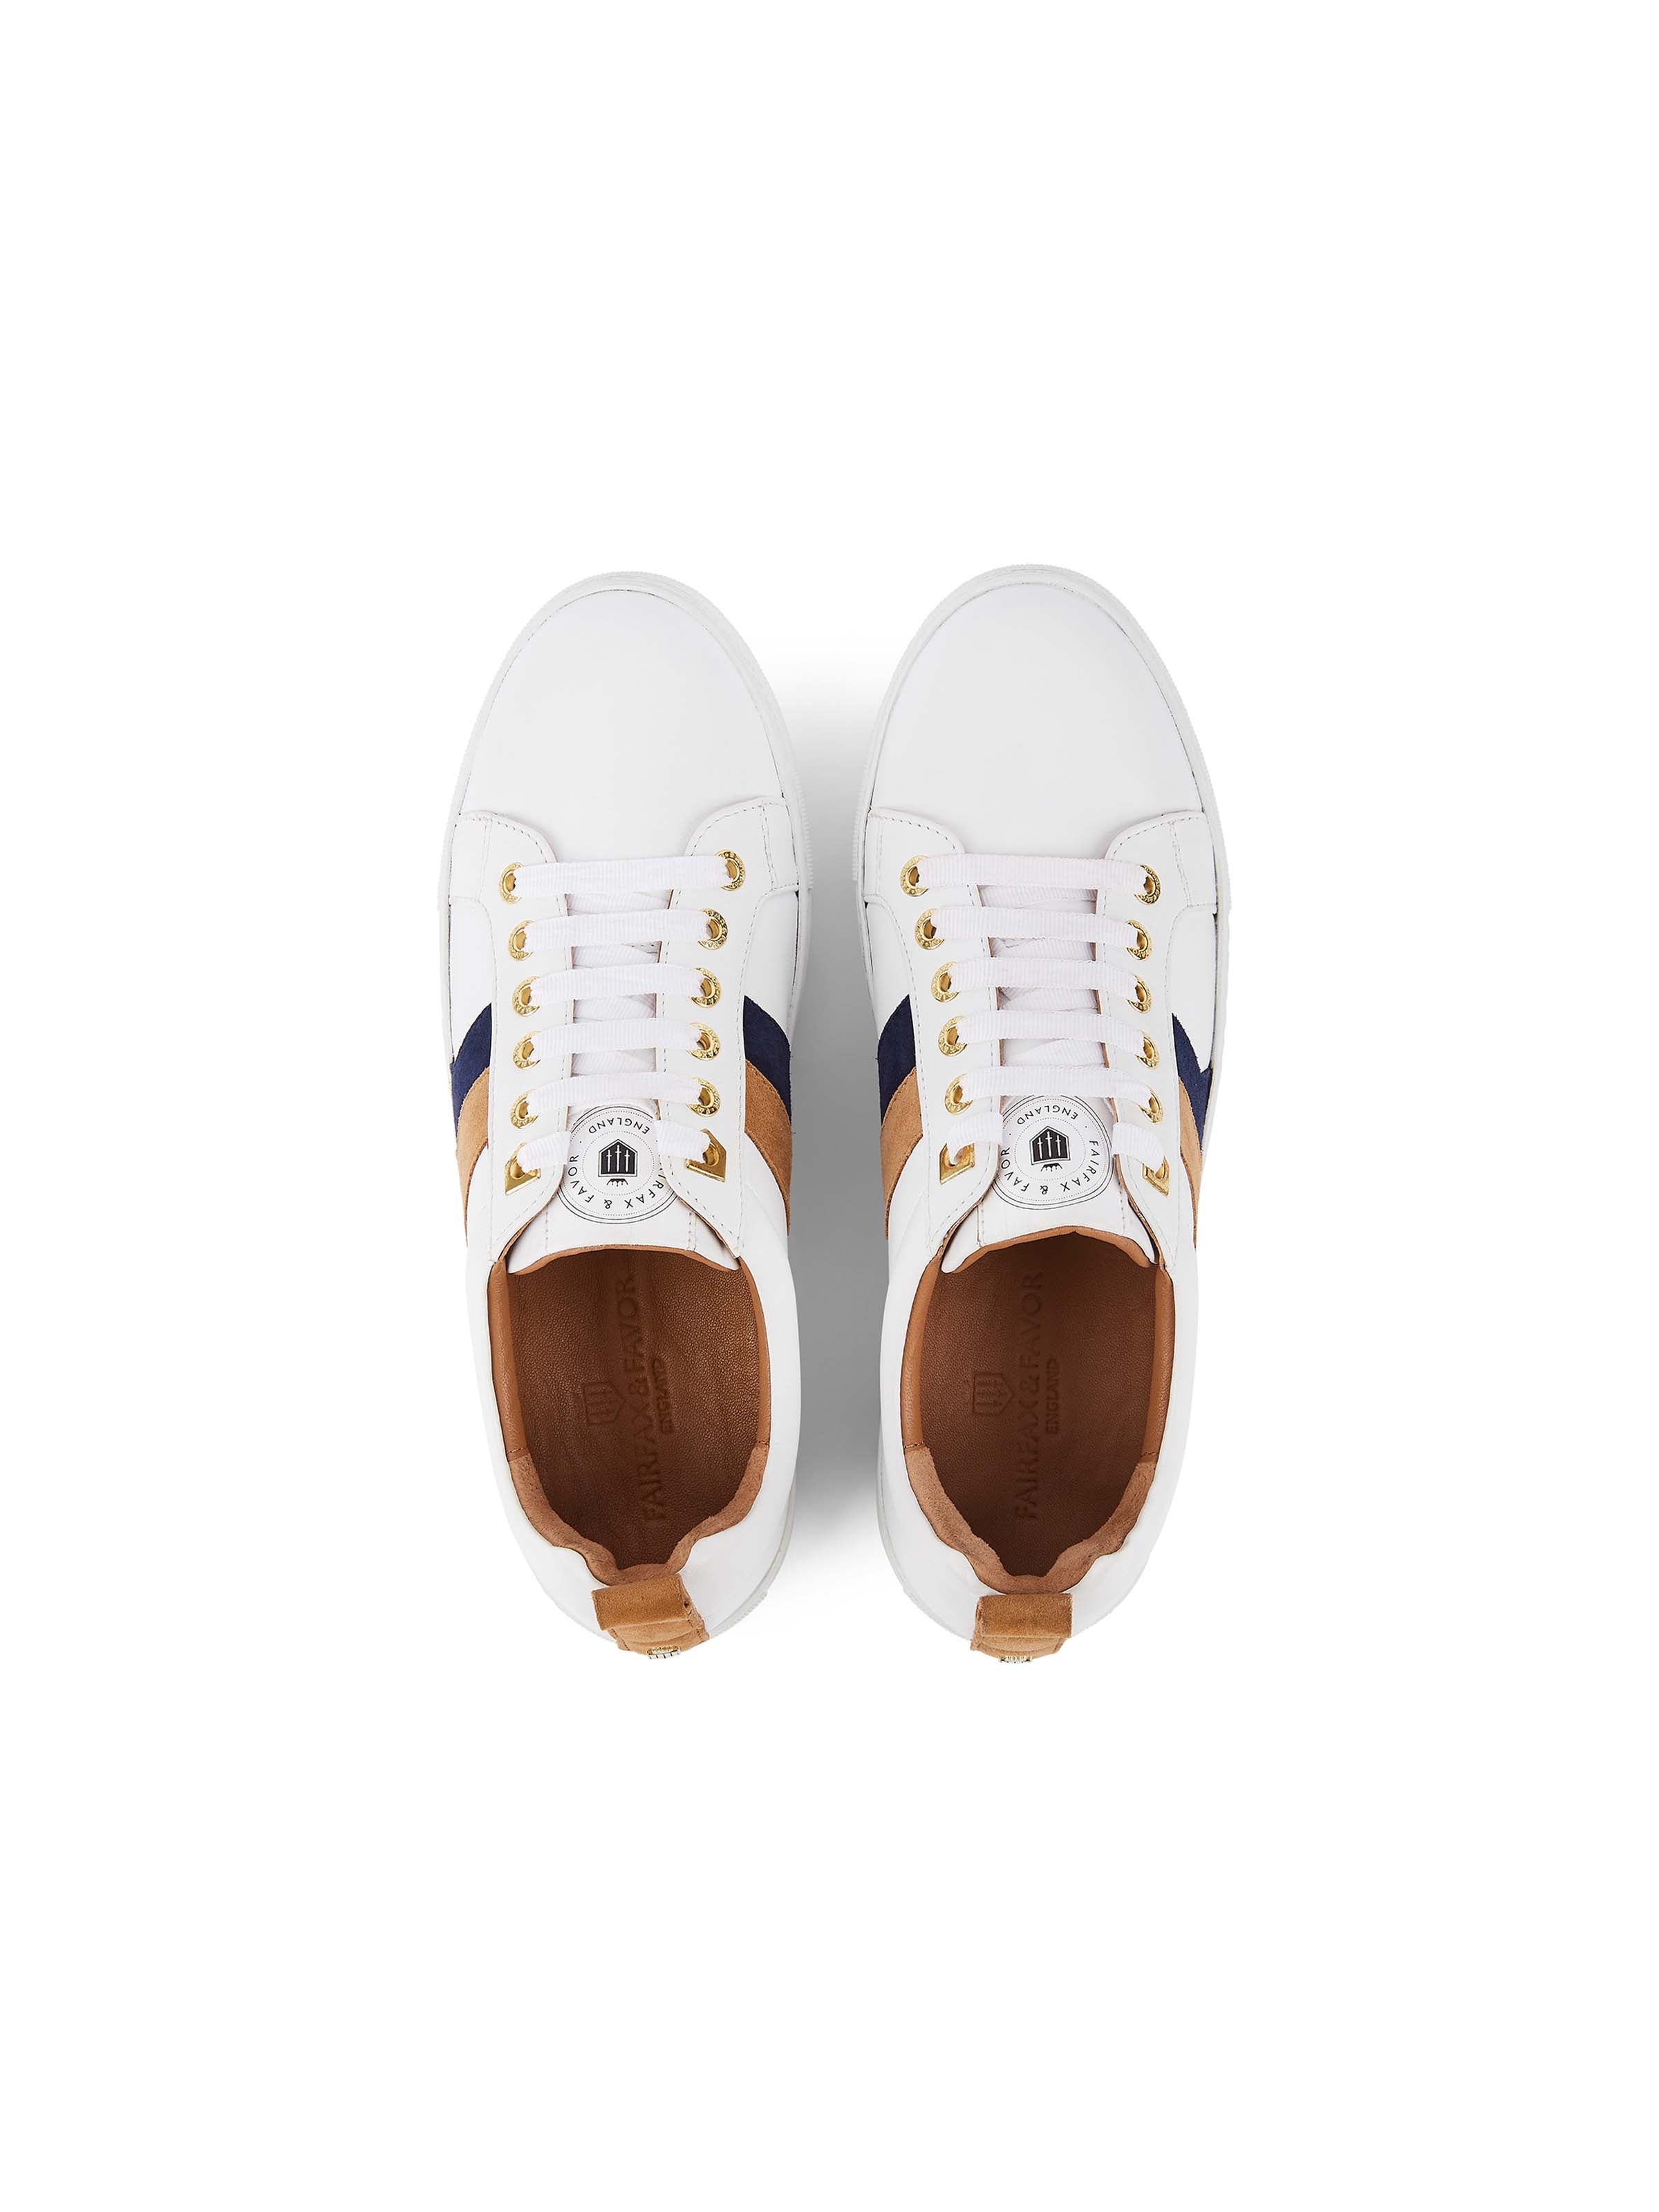 The Alexandra Trainer - Tan & Navy Suede